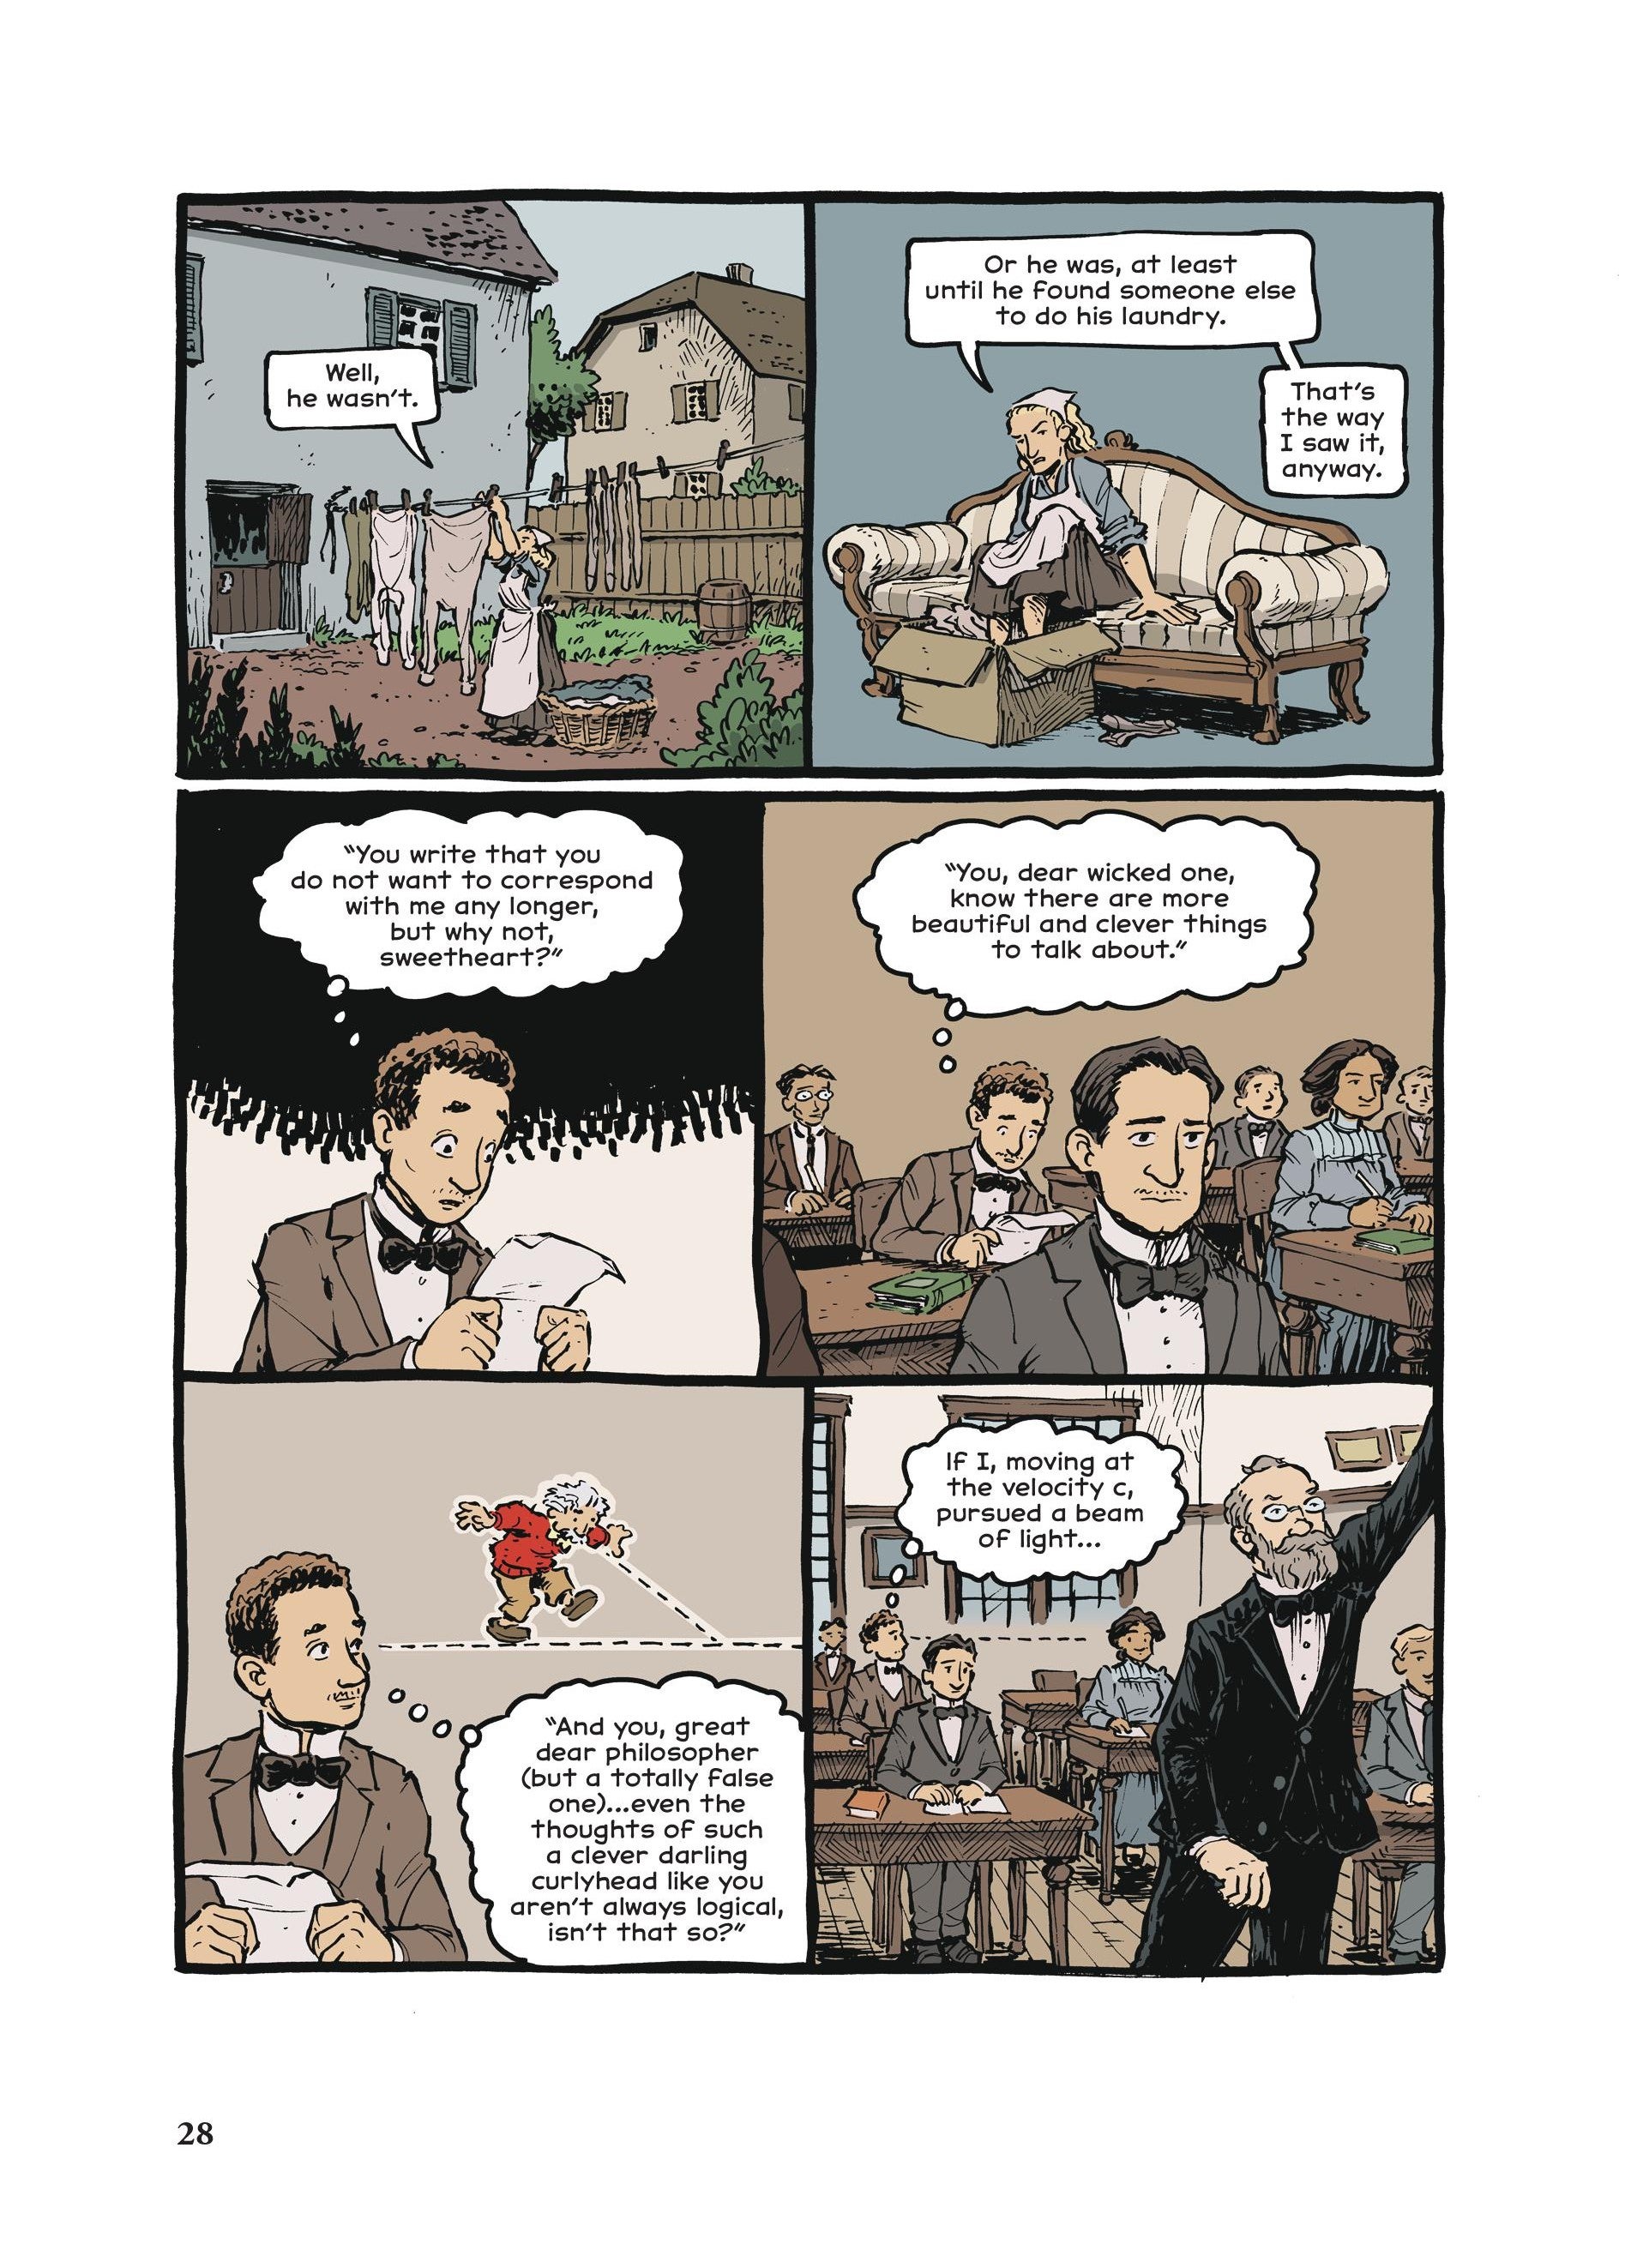 A comics page featuring Maria Winteler and Einstein breaking off their correspondence